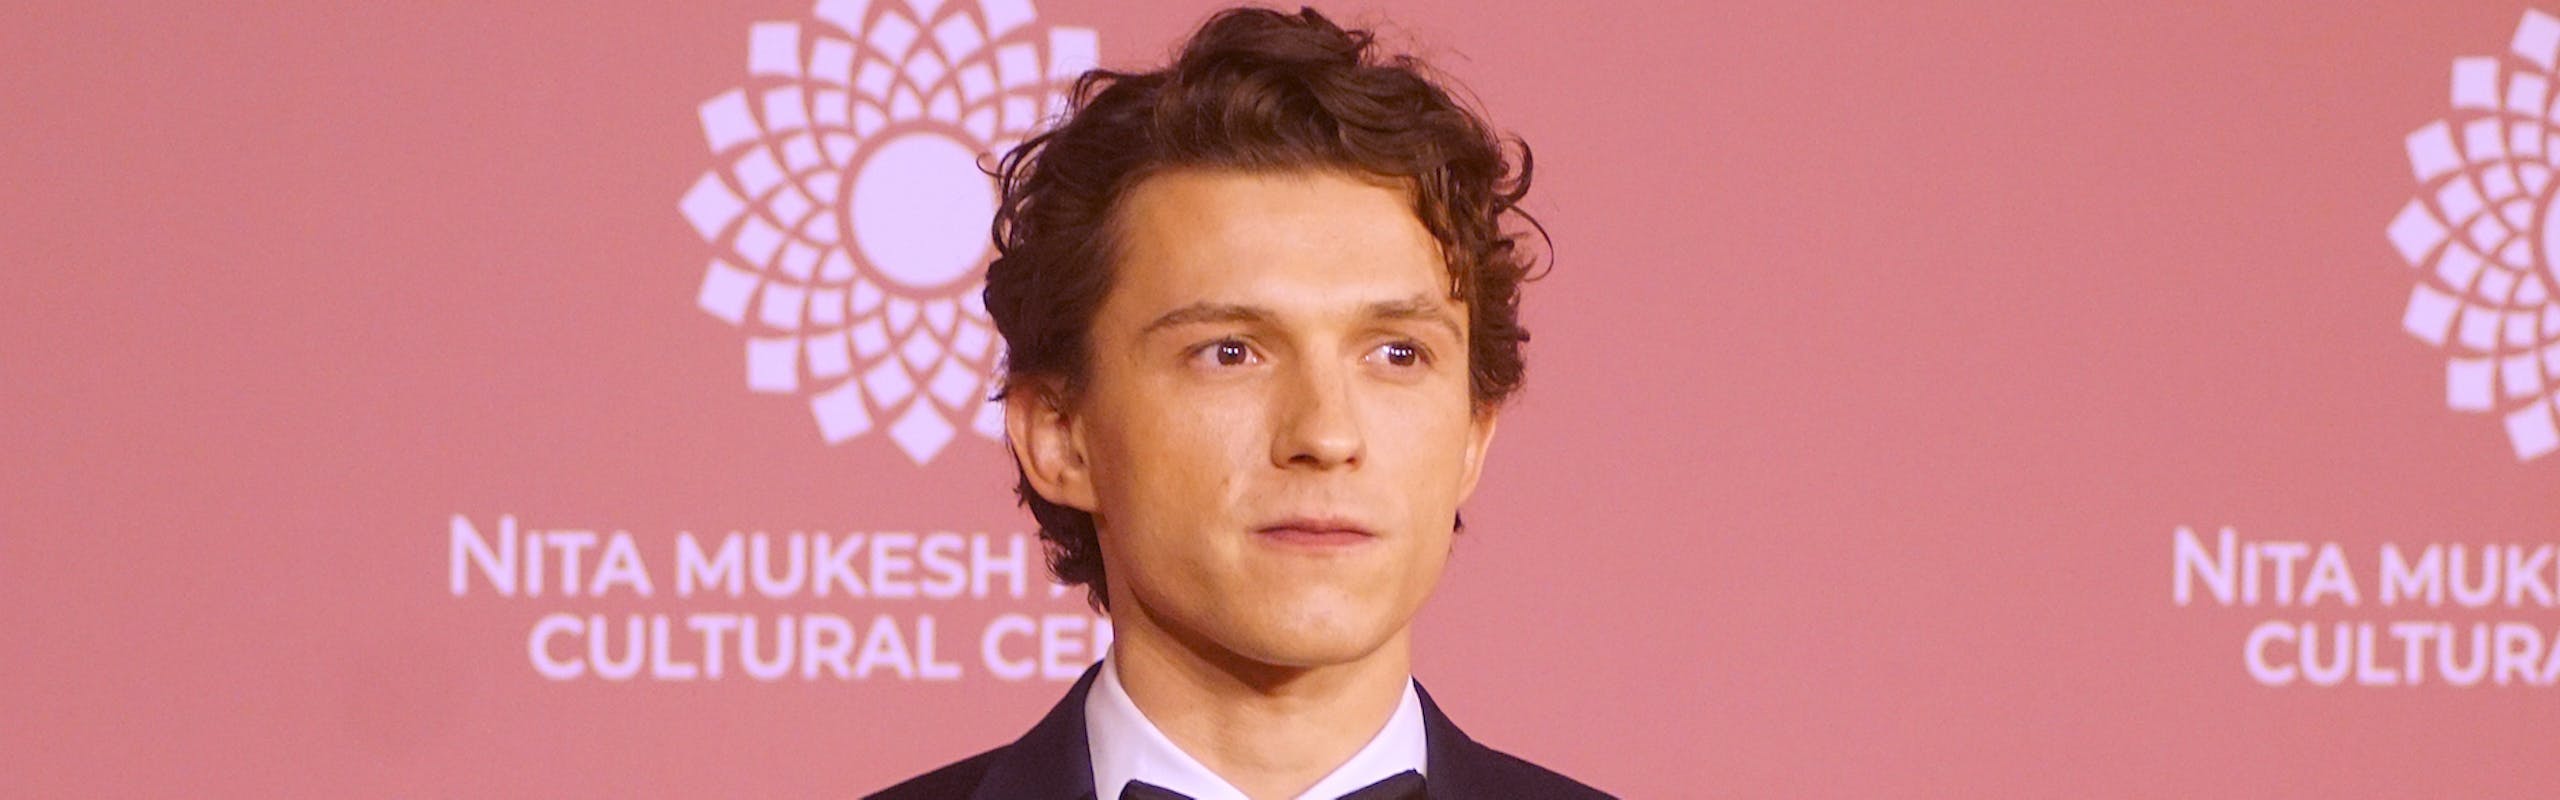 Tom Holland at Entertainment in India in a black suit and bowtie.